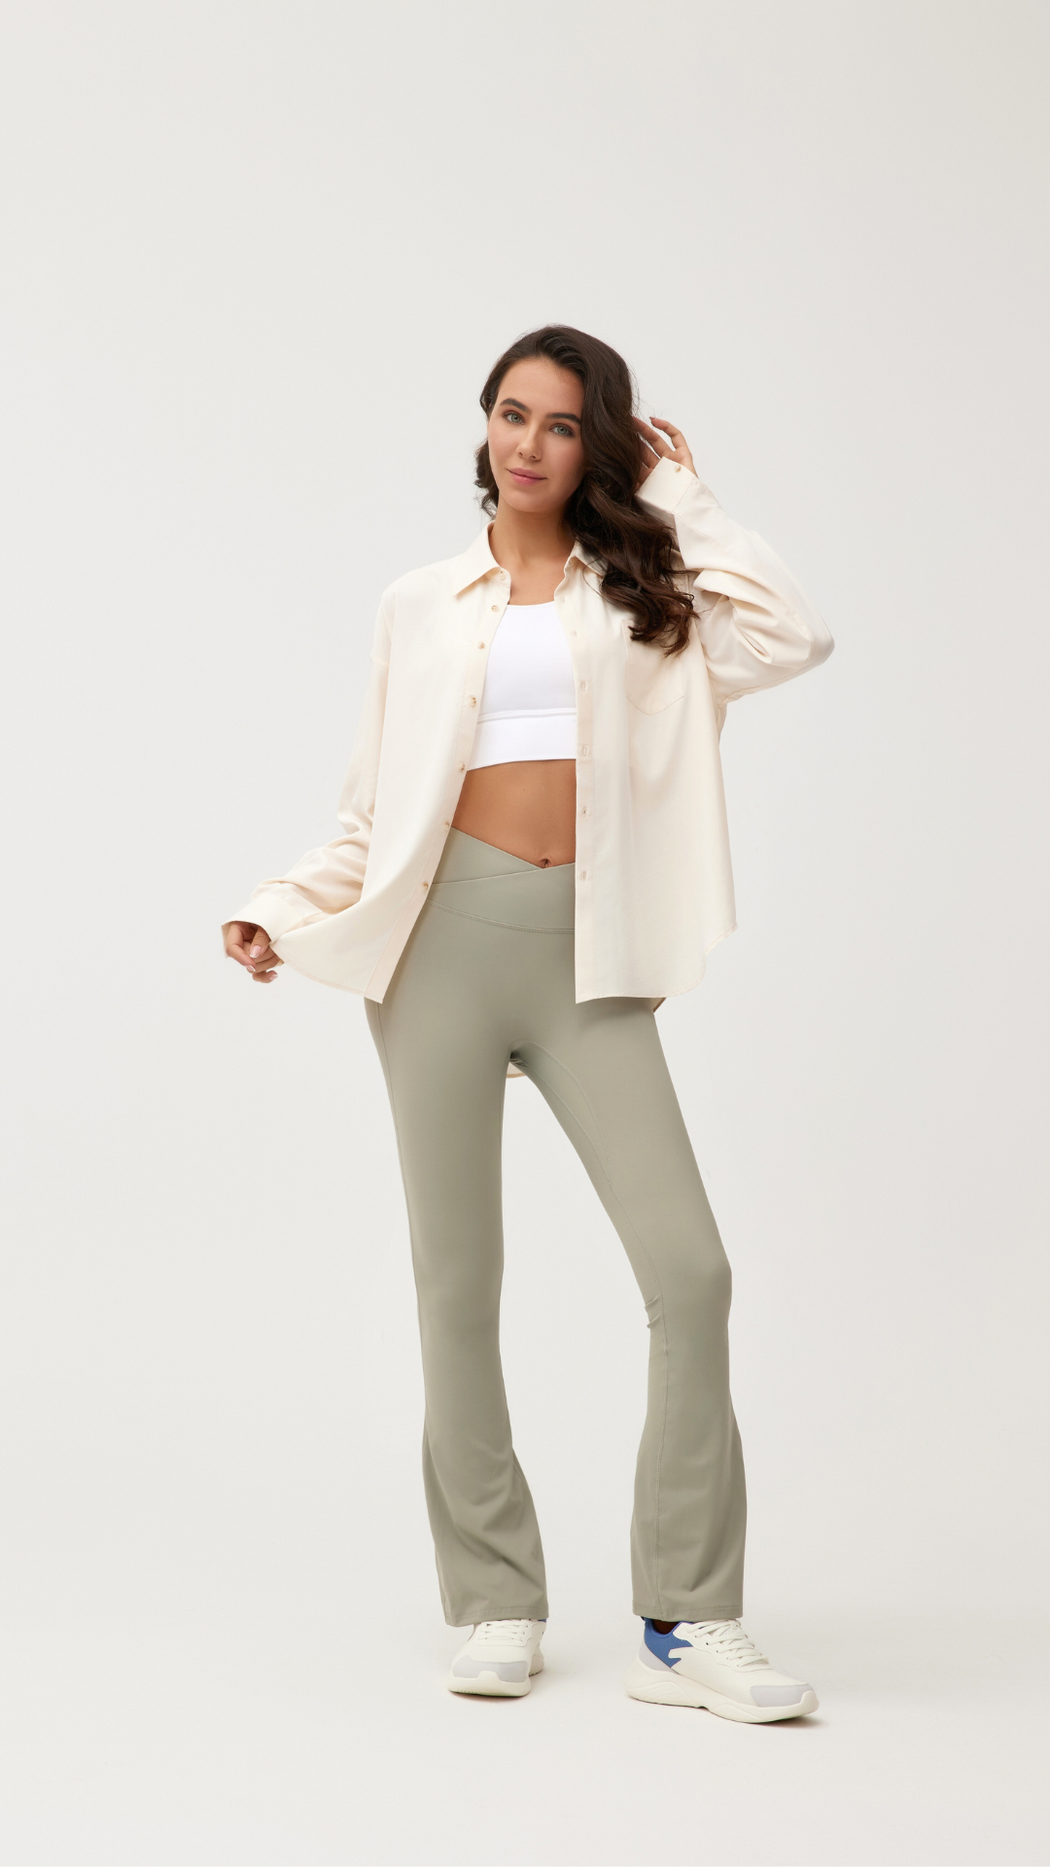 Aurora V Crossover High Waisted  Flare Bootcut Sports Leggings